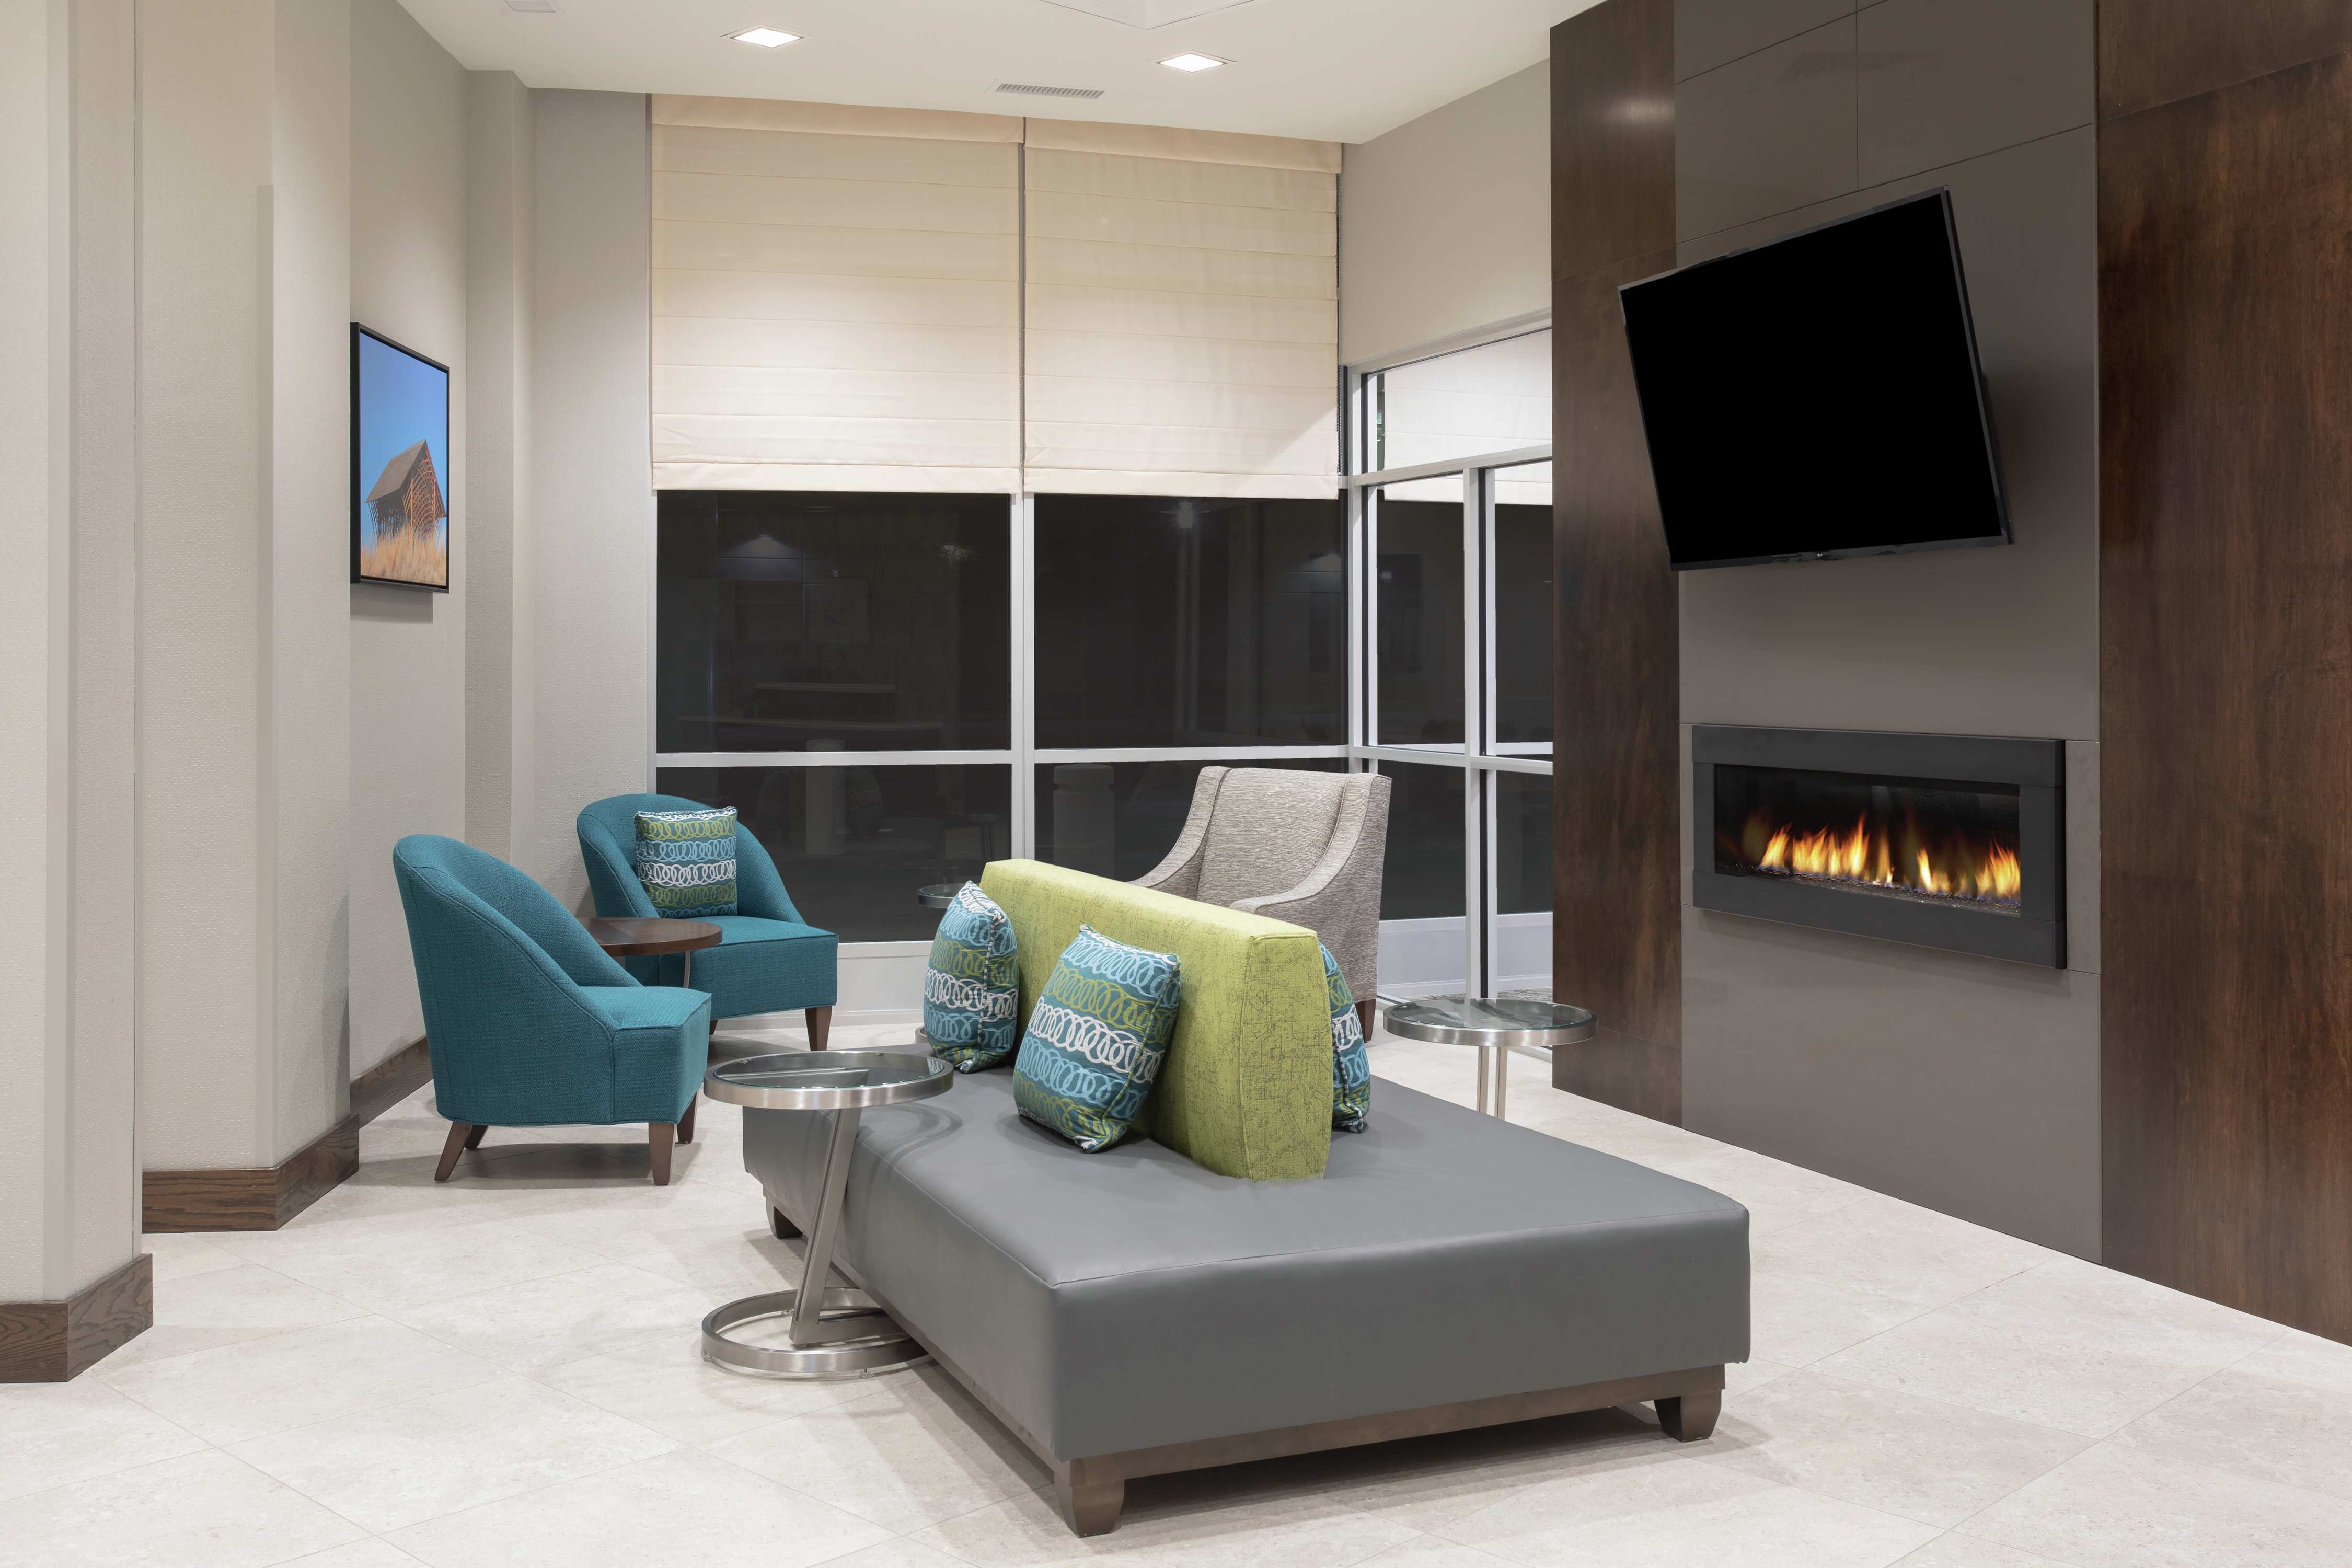 Lobby Lounge Area with TV and Fireplace